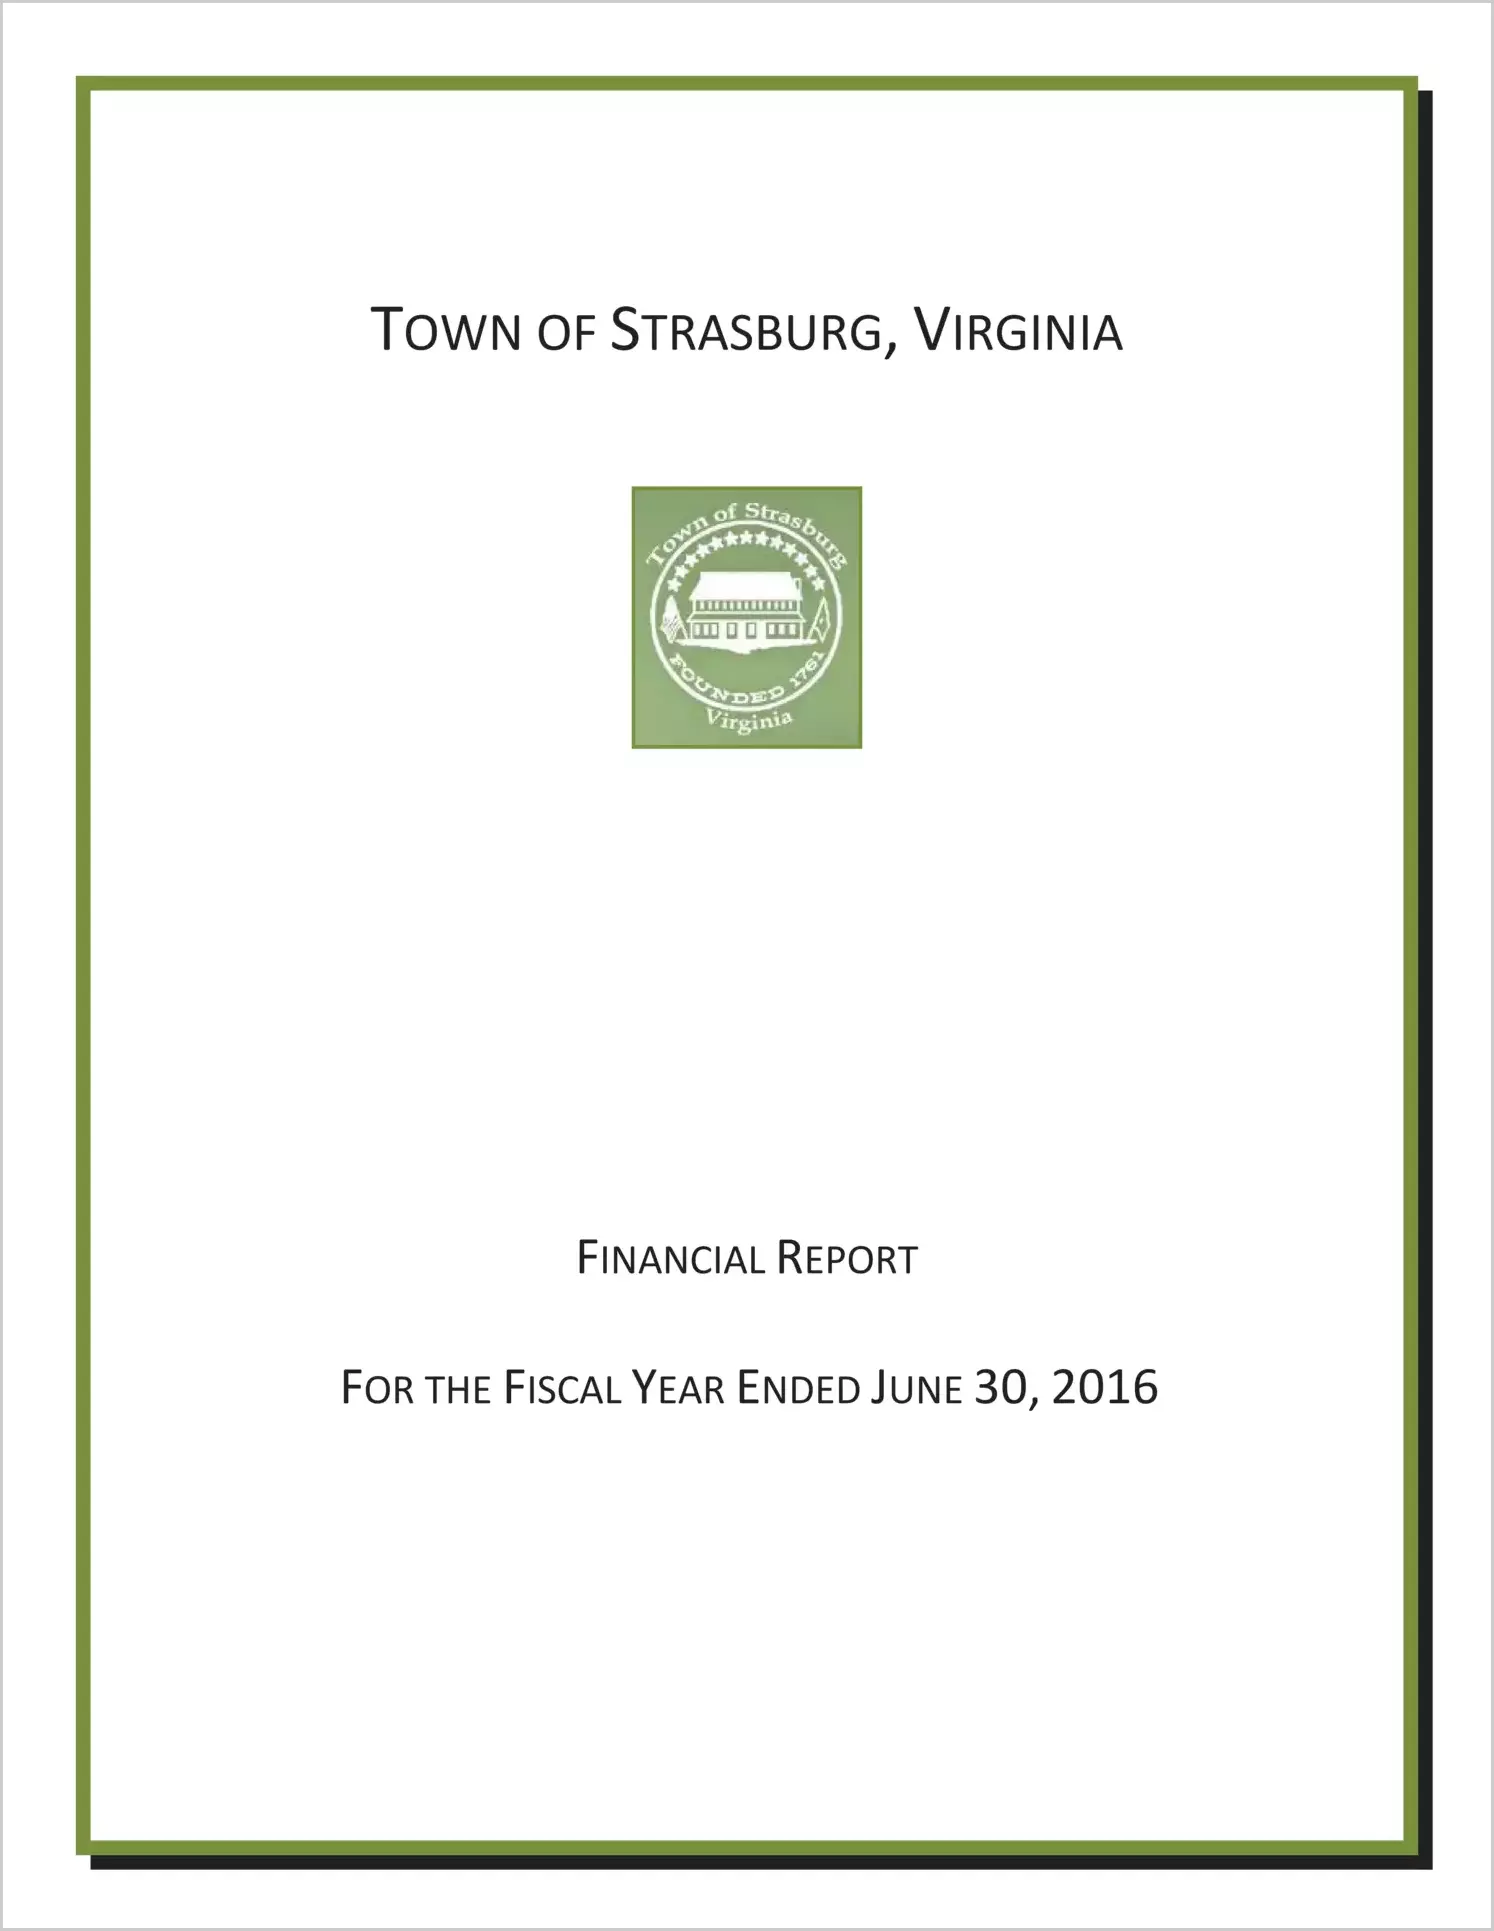 2016 Annual Financial Report for Town of Strasburg